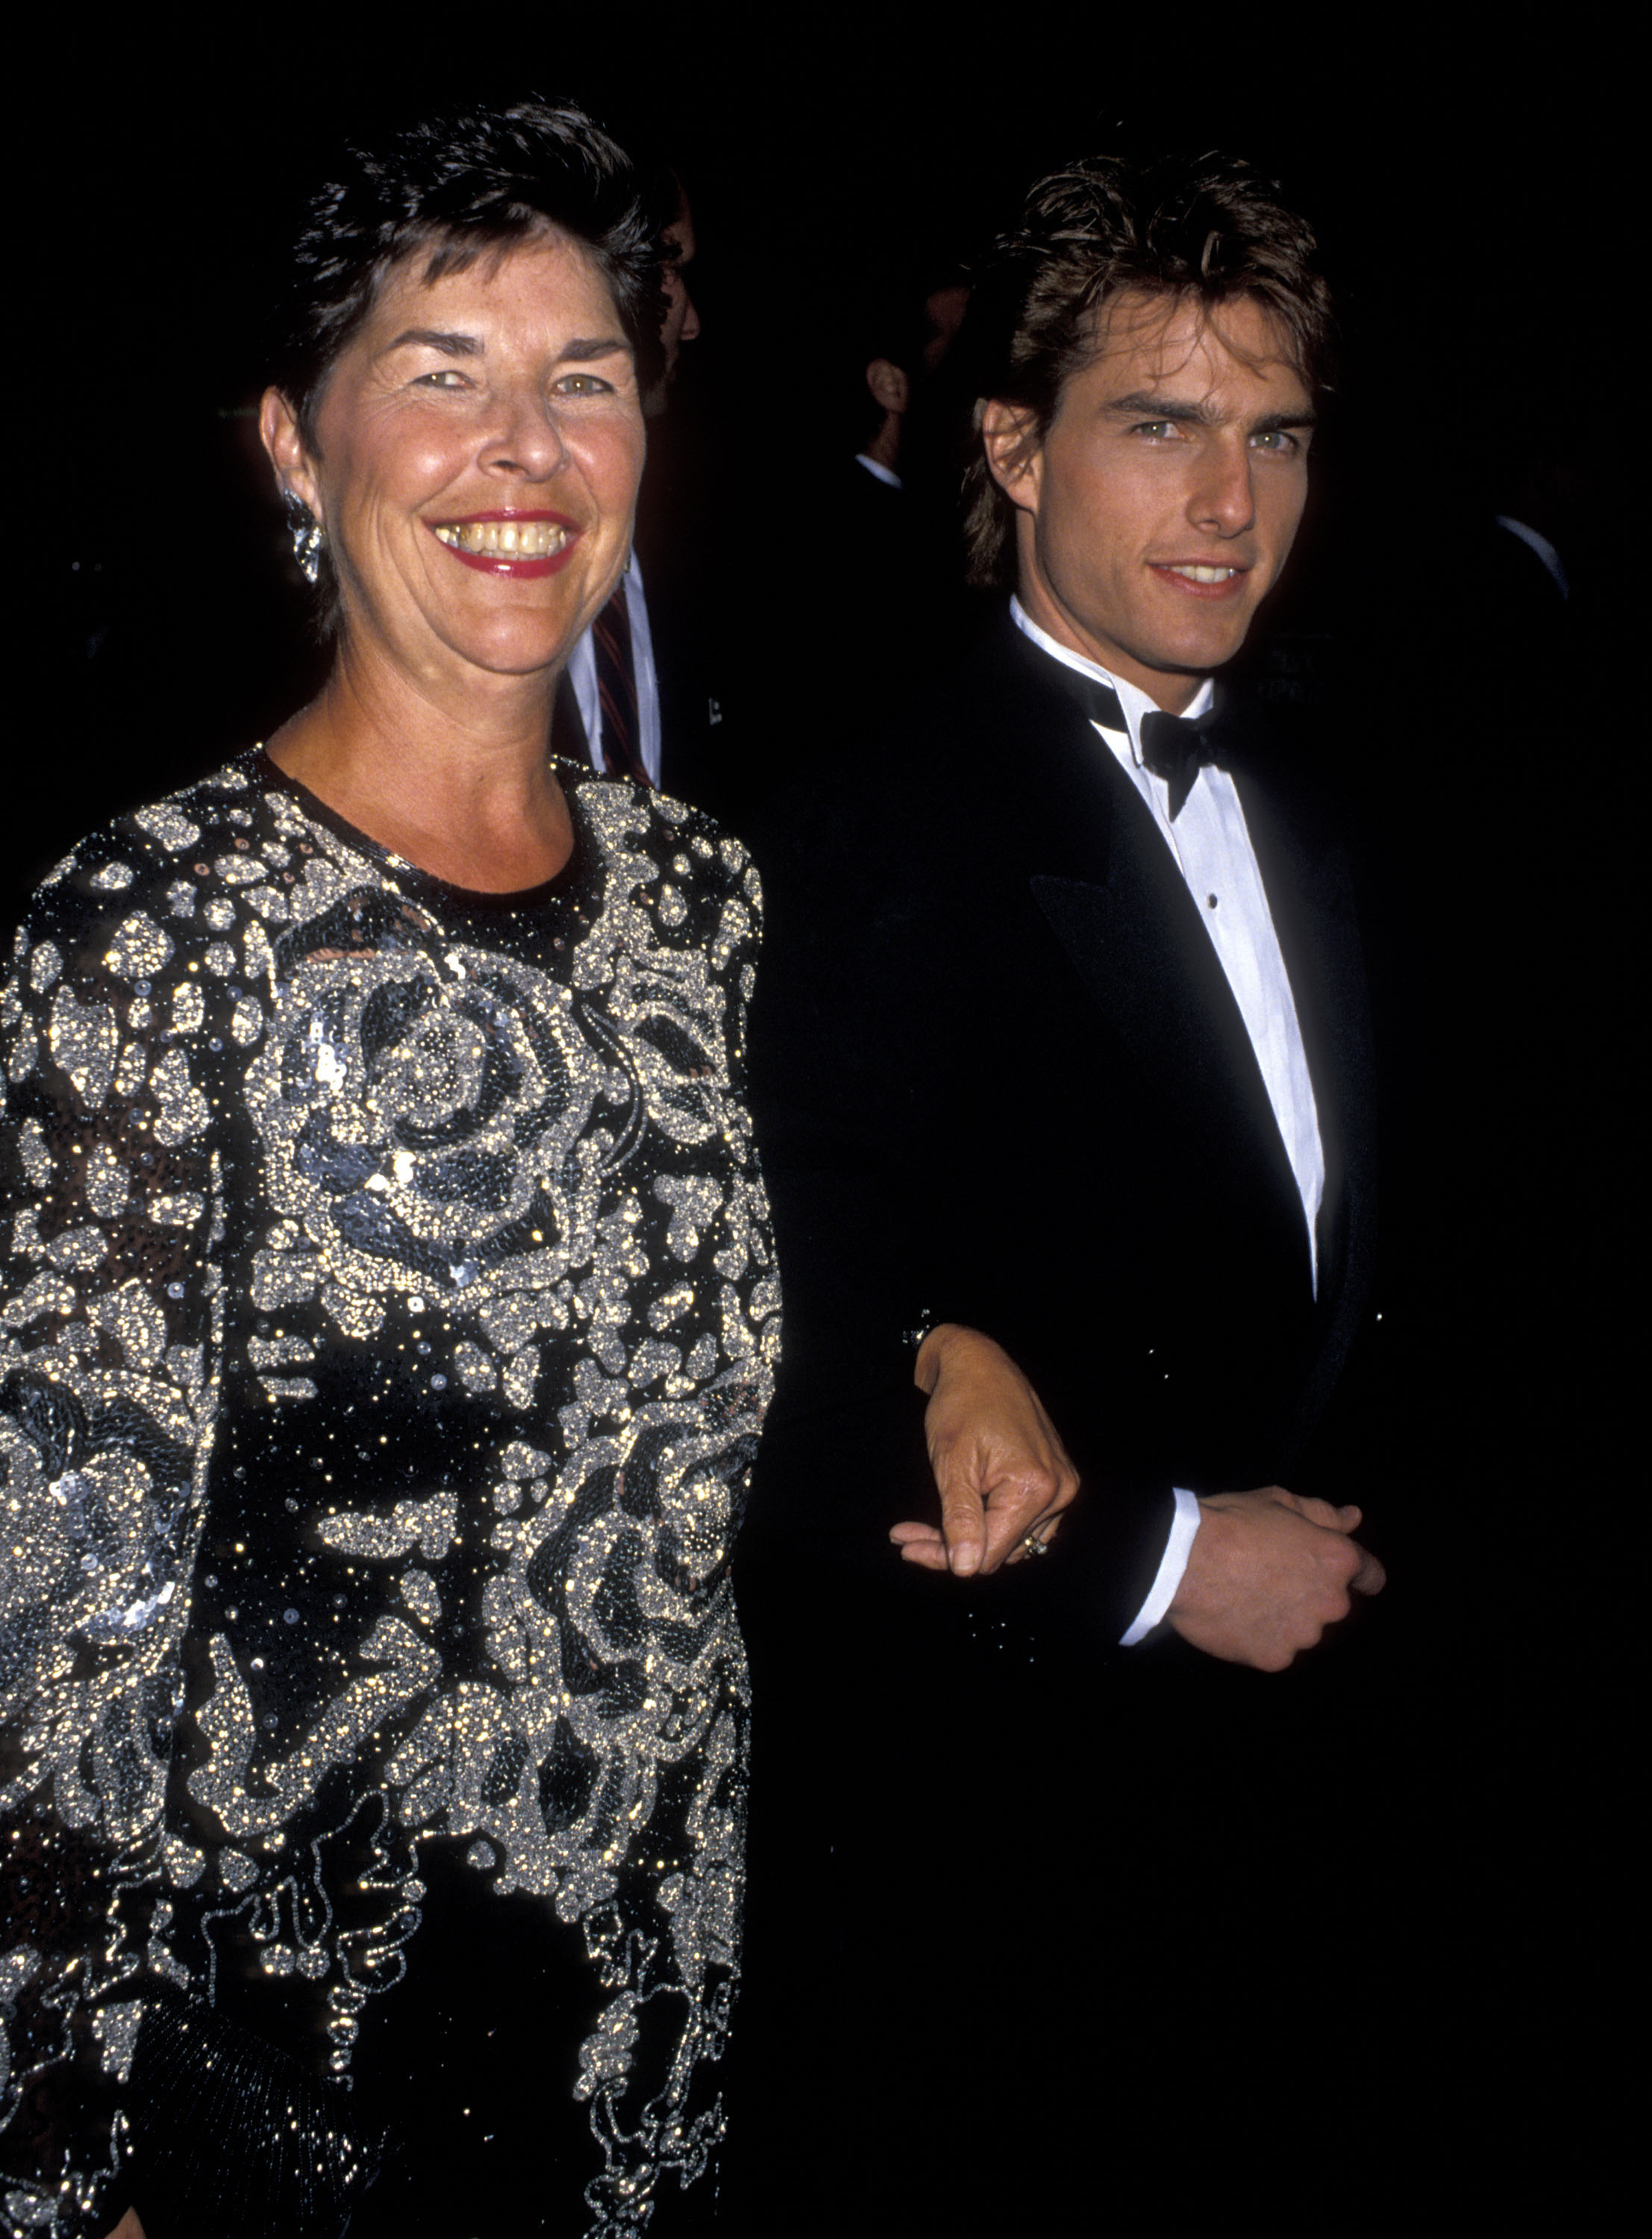 Mary Lee South and Tom Cruise attend the 47th Annual Golden Globe Awards in Beverly Hills, California, on January 20, 1990. | Source: Getty Images